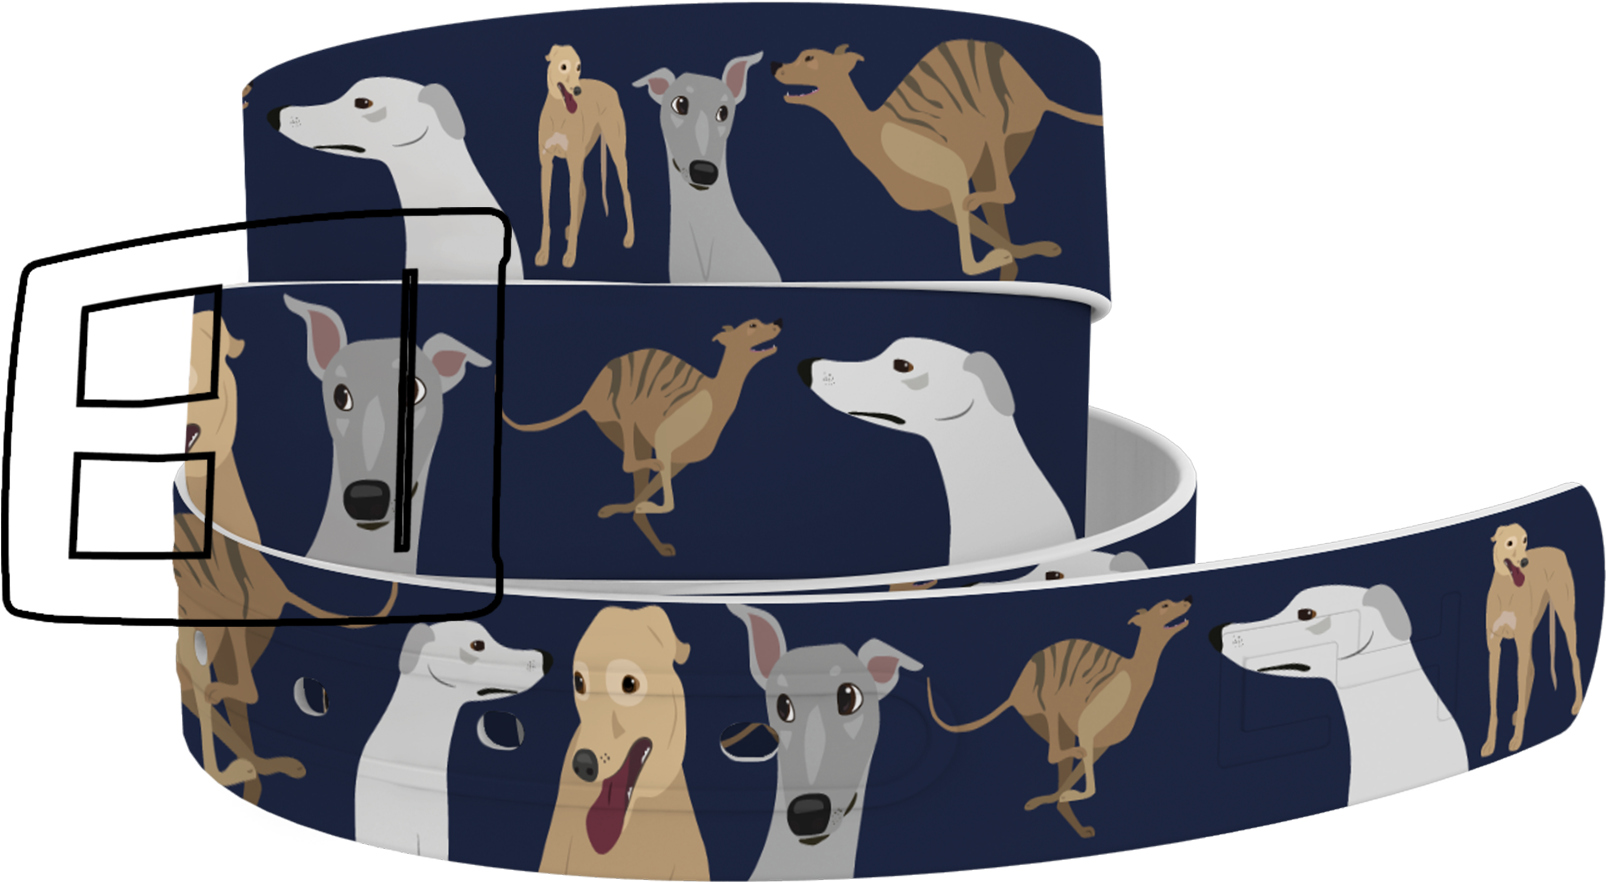 A Roll Of Tape With Cartoon Dogs And Camels